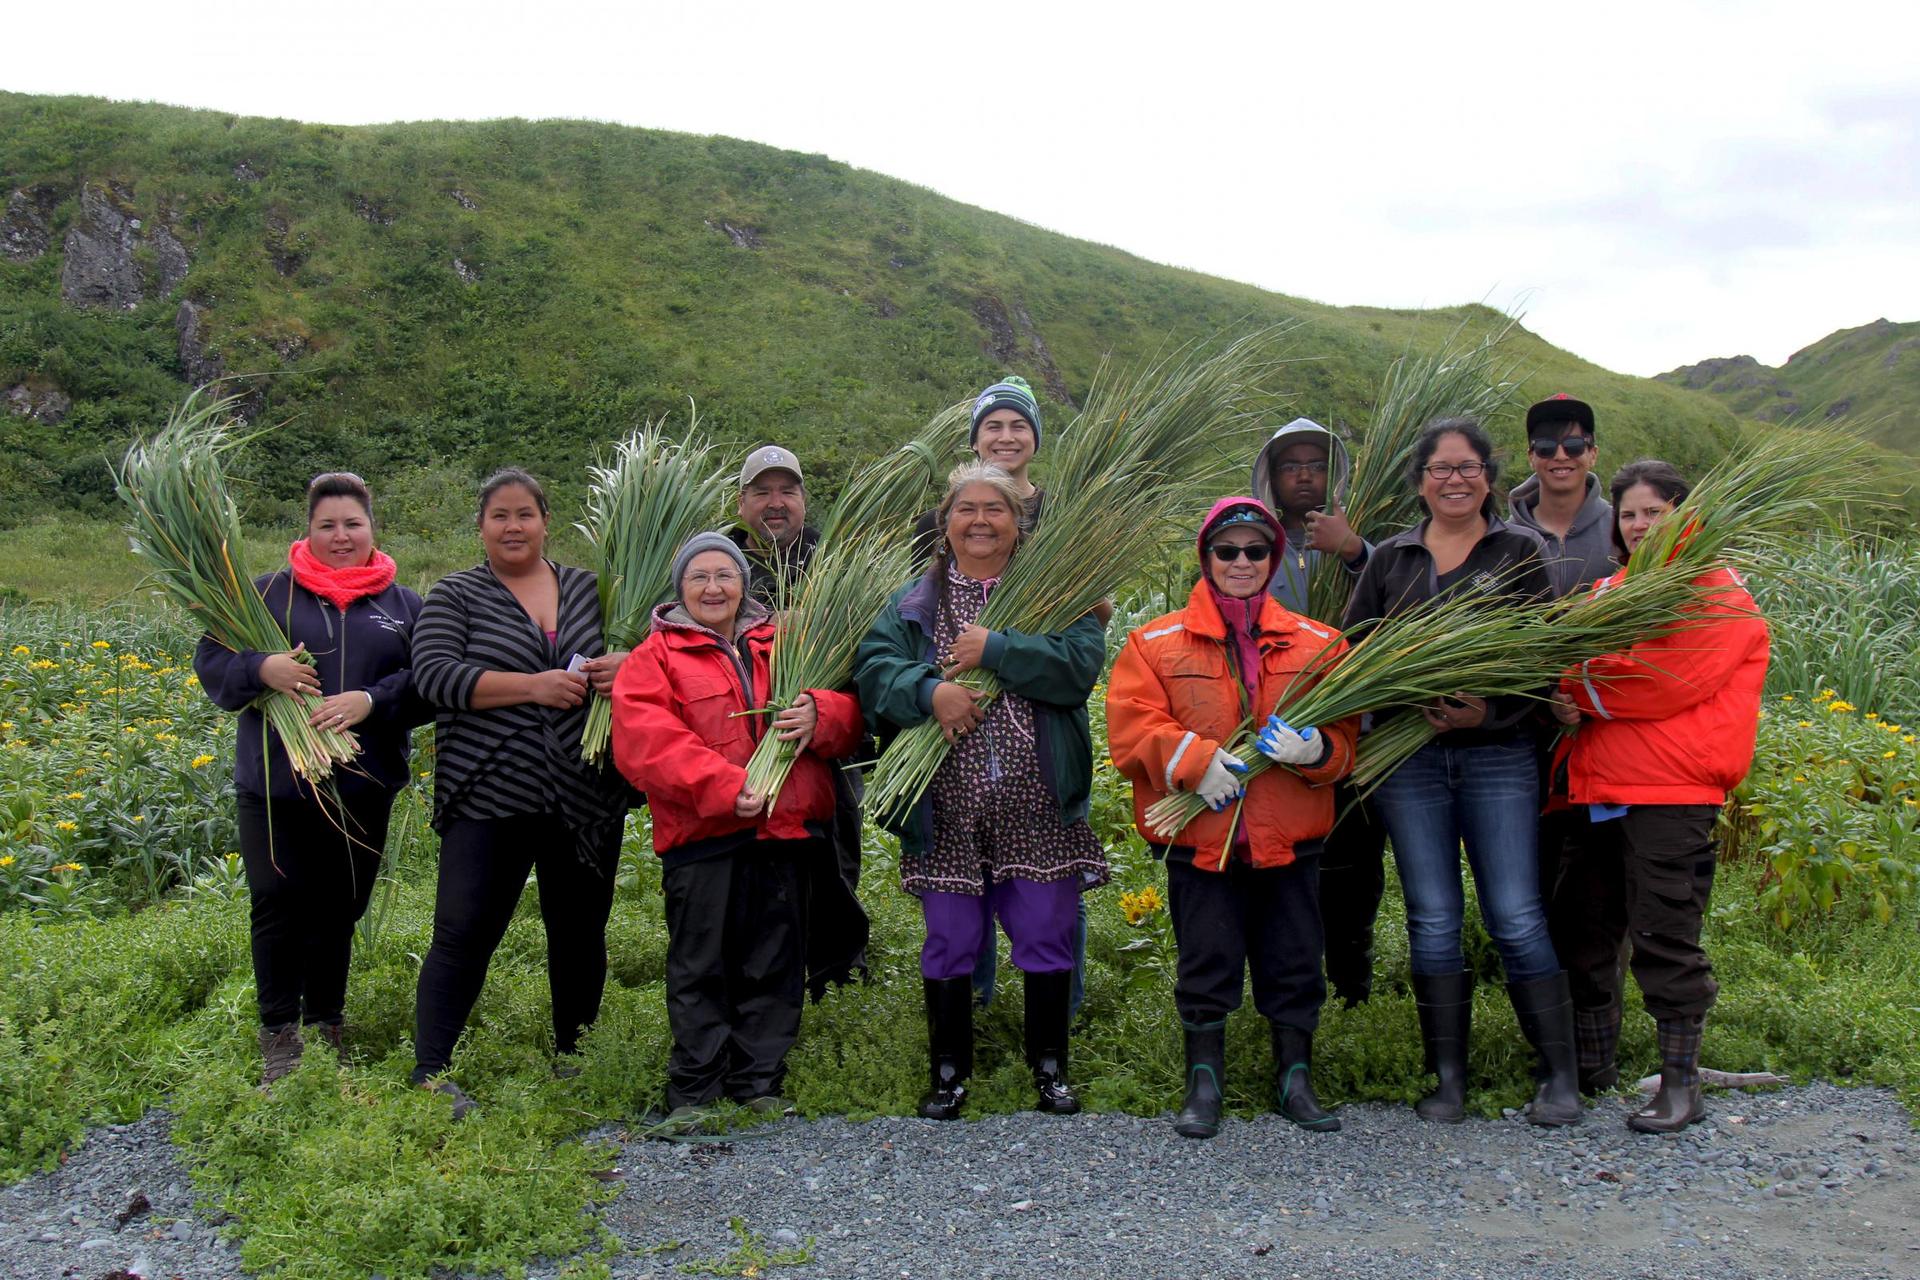 a group of people in a field holding traditional grass baskets